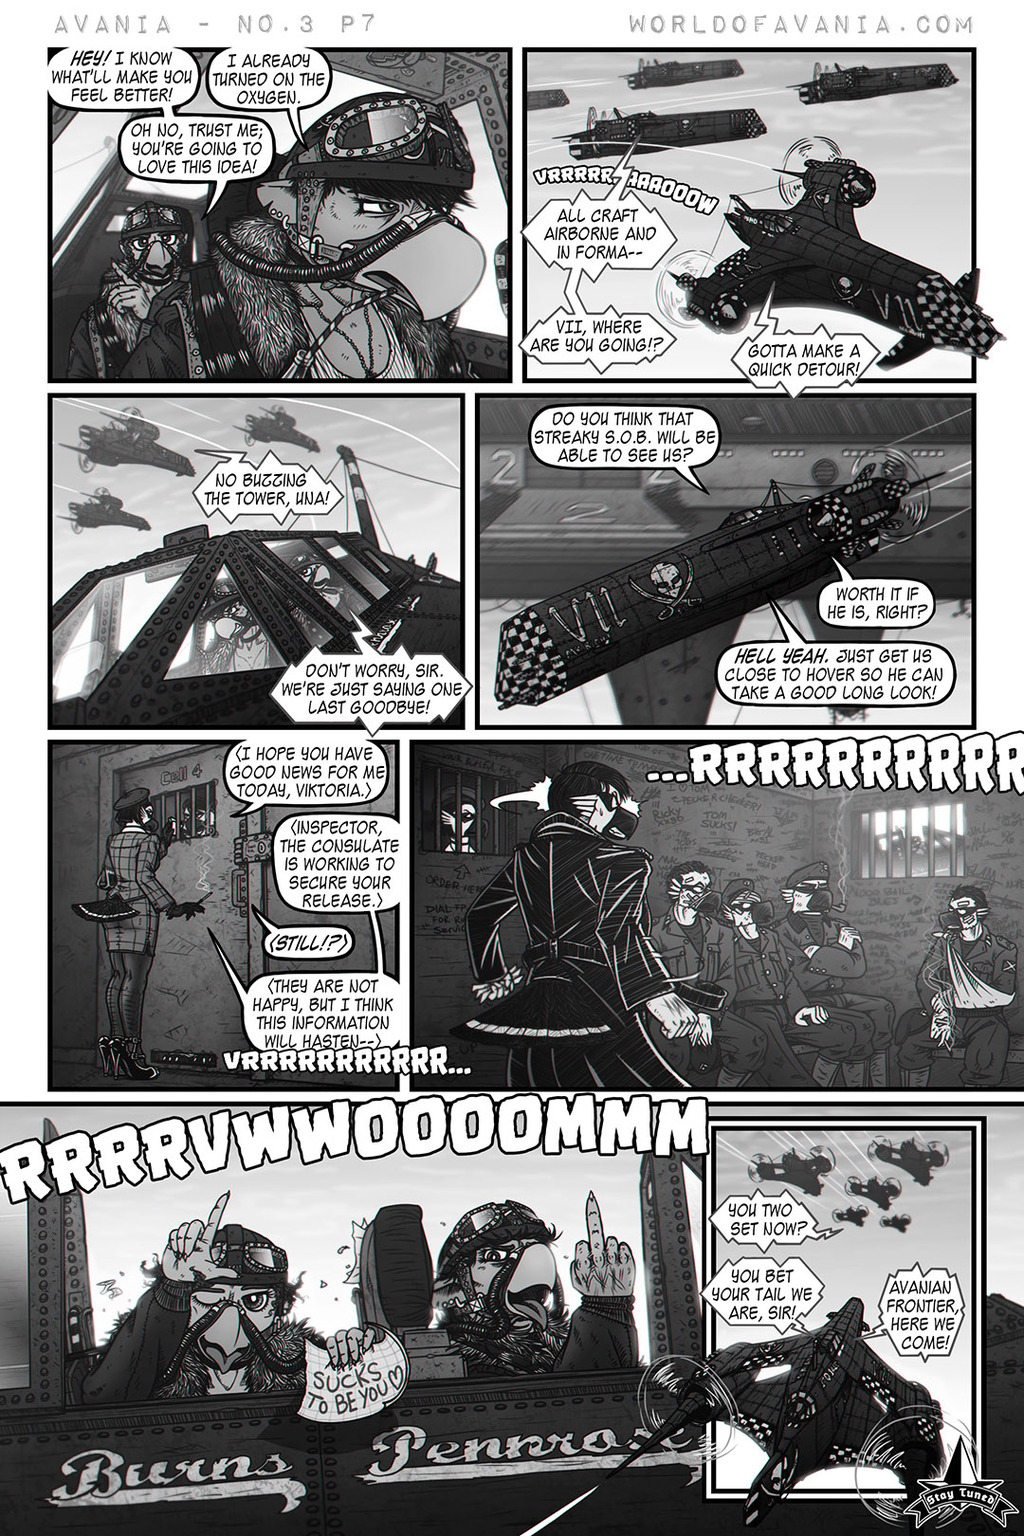 Avania Comic - Issue No.3, Page 7